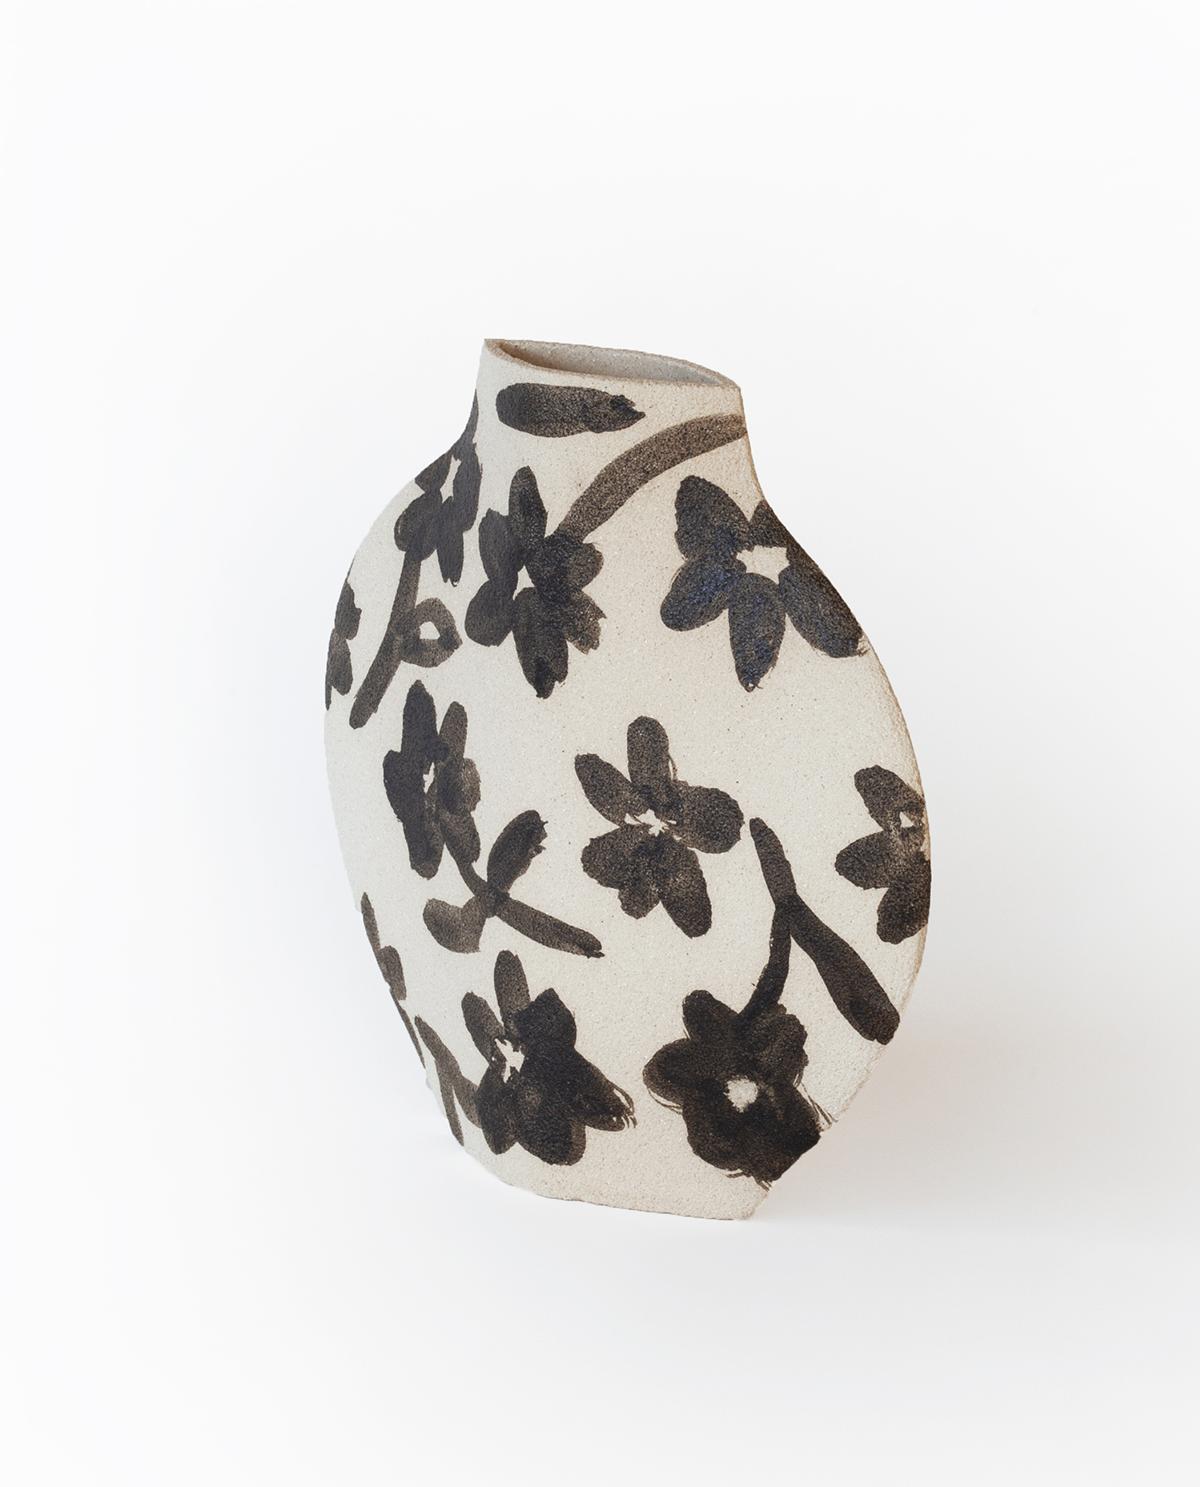 ‘Flowers Pattern’ Handmade White Ceramic Vase

This vase is part of a new series inspired by iconic Art (and more precisely paintings) movements. Here is our Lune [M] model with motifs based on floral paintings. They are hand-painted on the vase